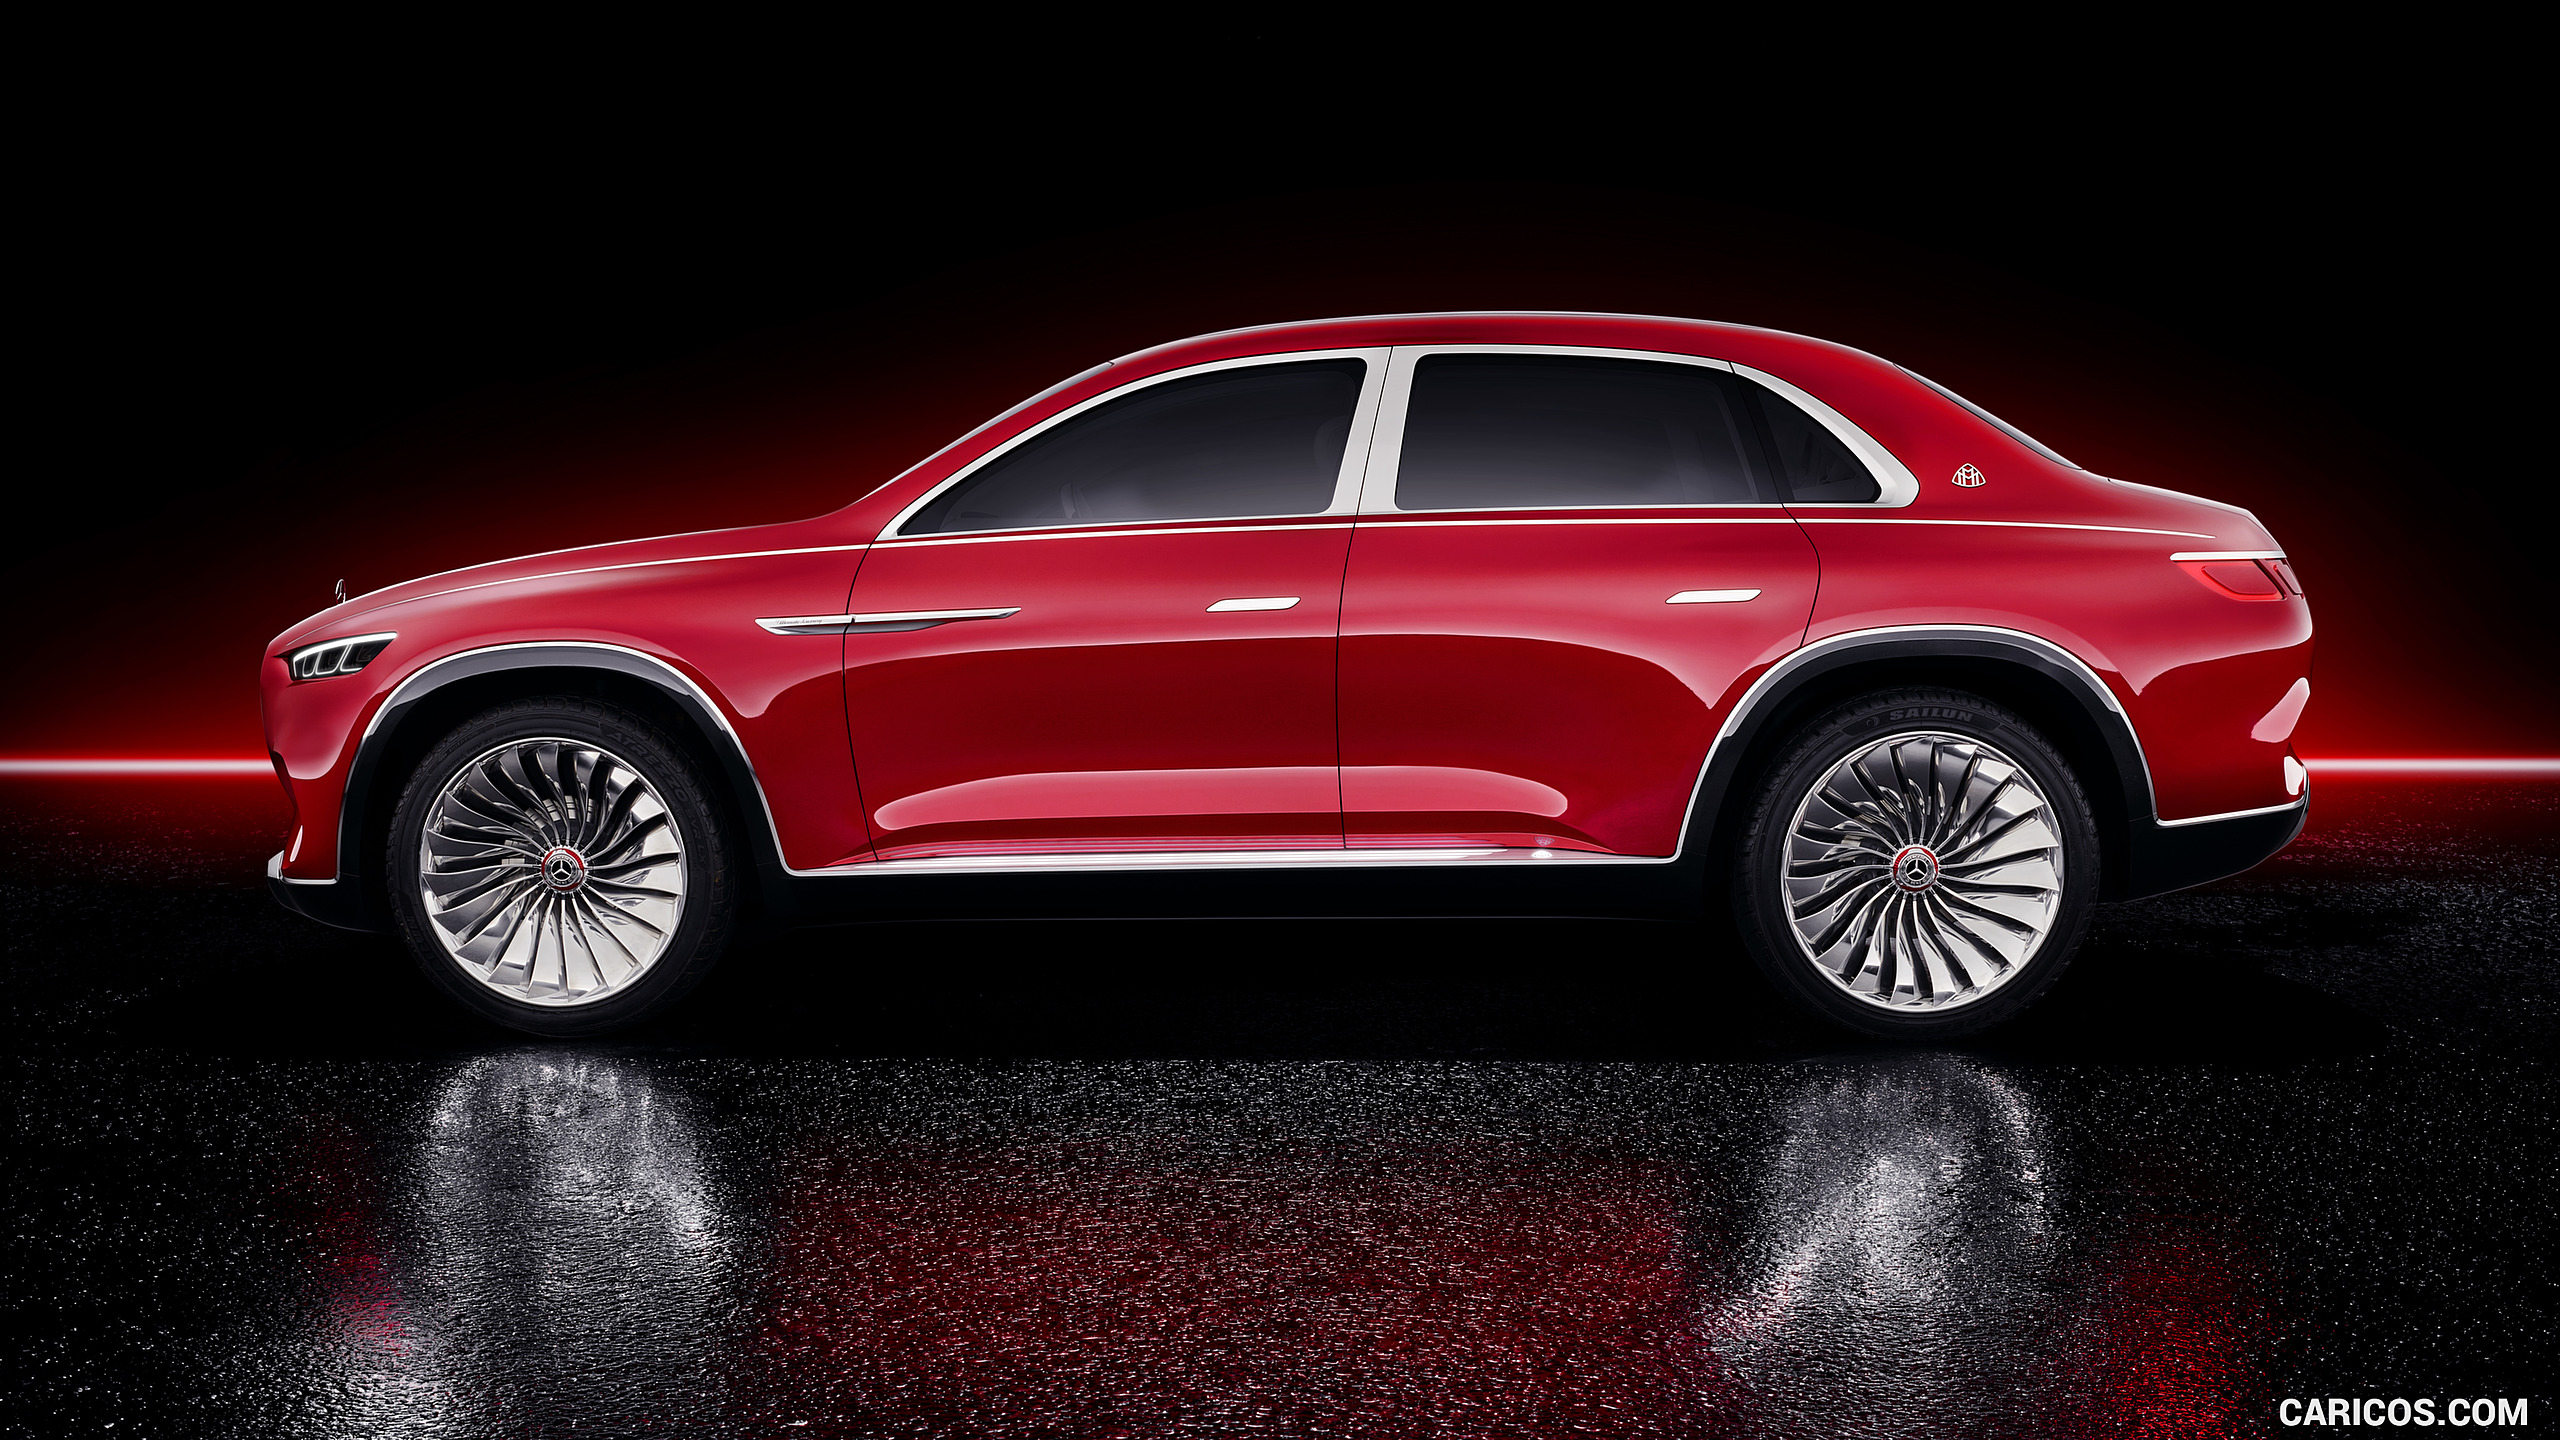 2018 Mercedes-Maybach Vision Ultimate Luxury SUV Concept - Side, #19 of 41